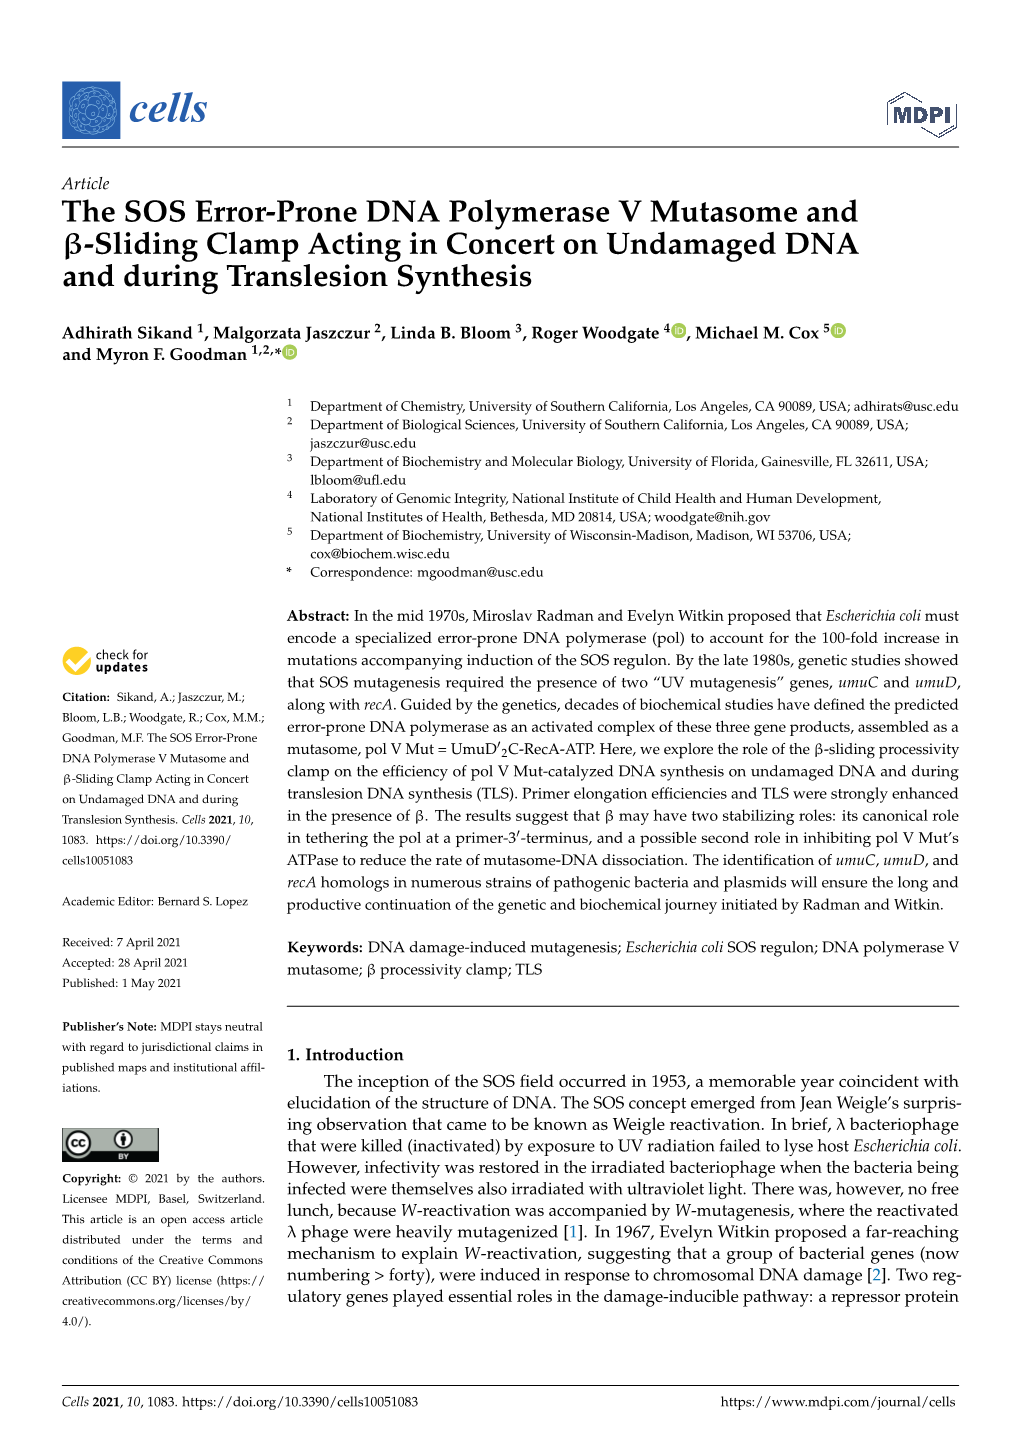 The SOS Error-Prone DNA Polymerase V Mutasome and Β-Sliding Clamp Acting in Concert on Undamaged DNA and During Translesion Synthesis